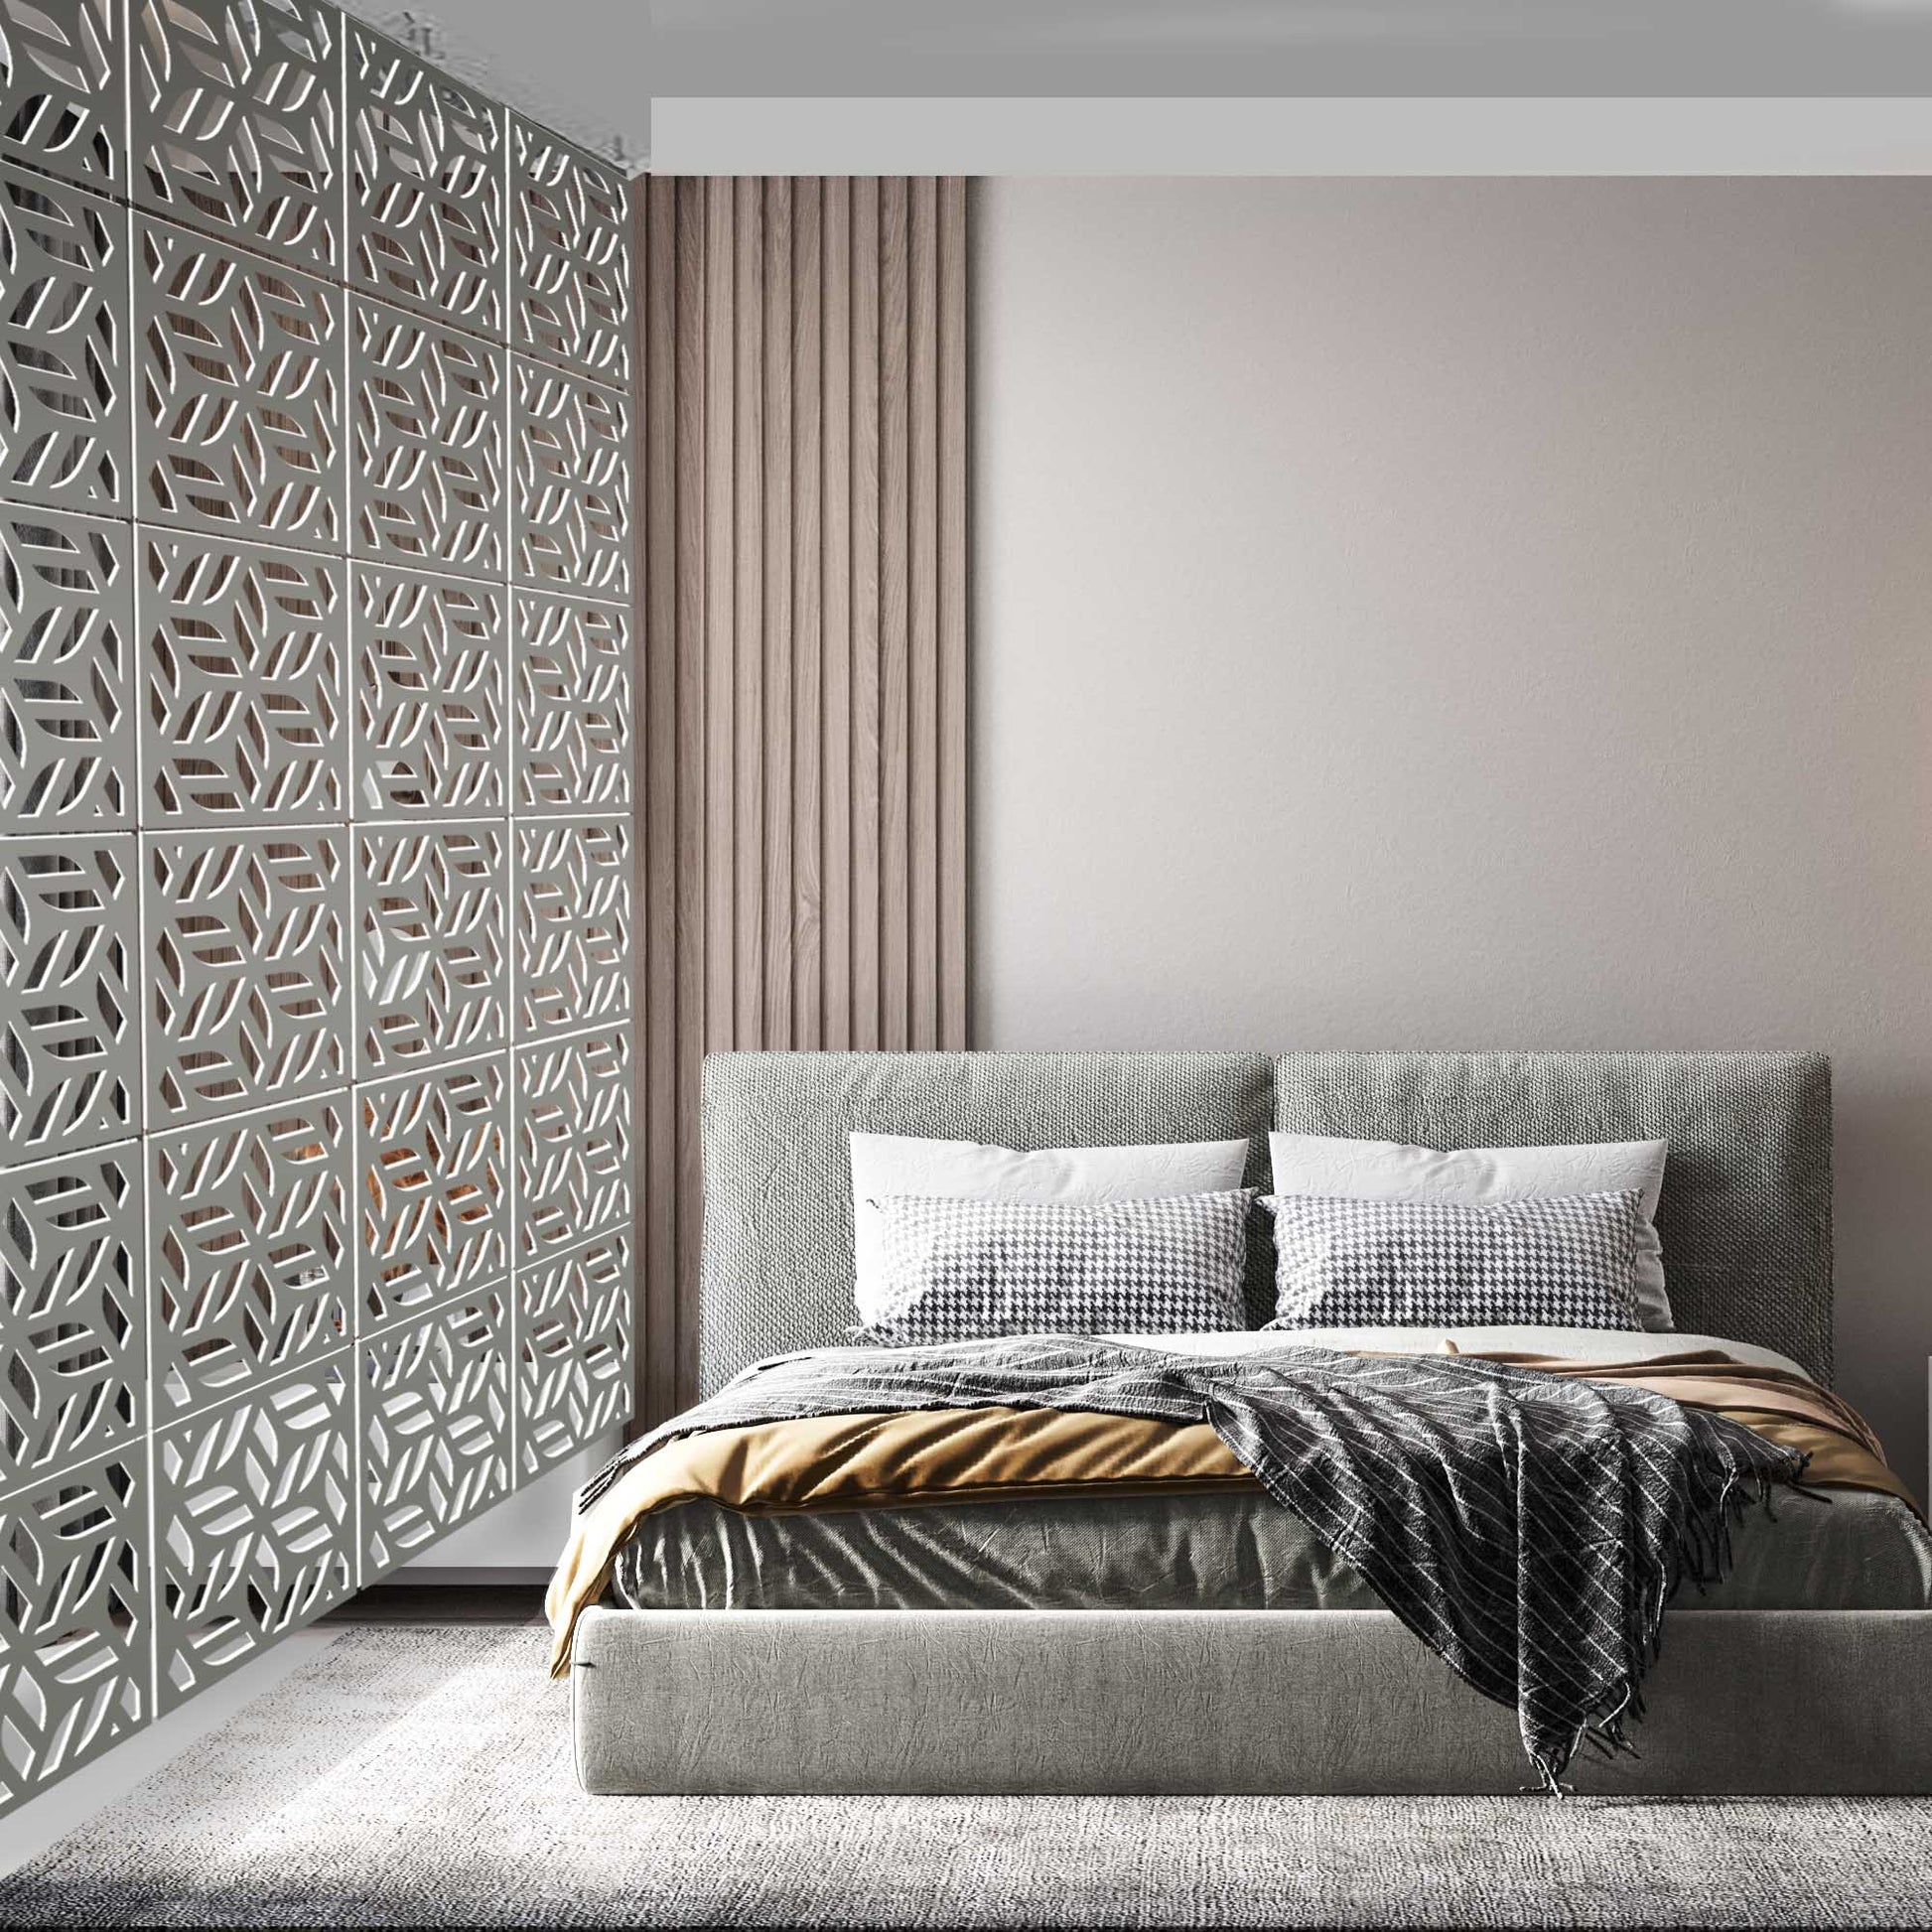 Room dividers, Privacy Screen PVC Hanging Room Dividers CraftivaArt, Room dividers, Partition Panel room divider , Room Divider, Custom Divider Screen, Privacy Screen, Hanging Panel Room Divider, PVC room divider screen, wall art, wall panel, wall partition, wall divider